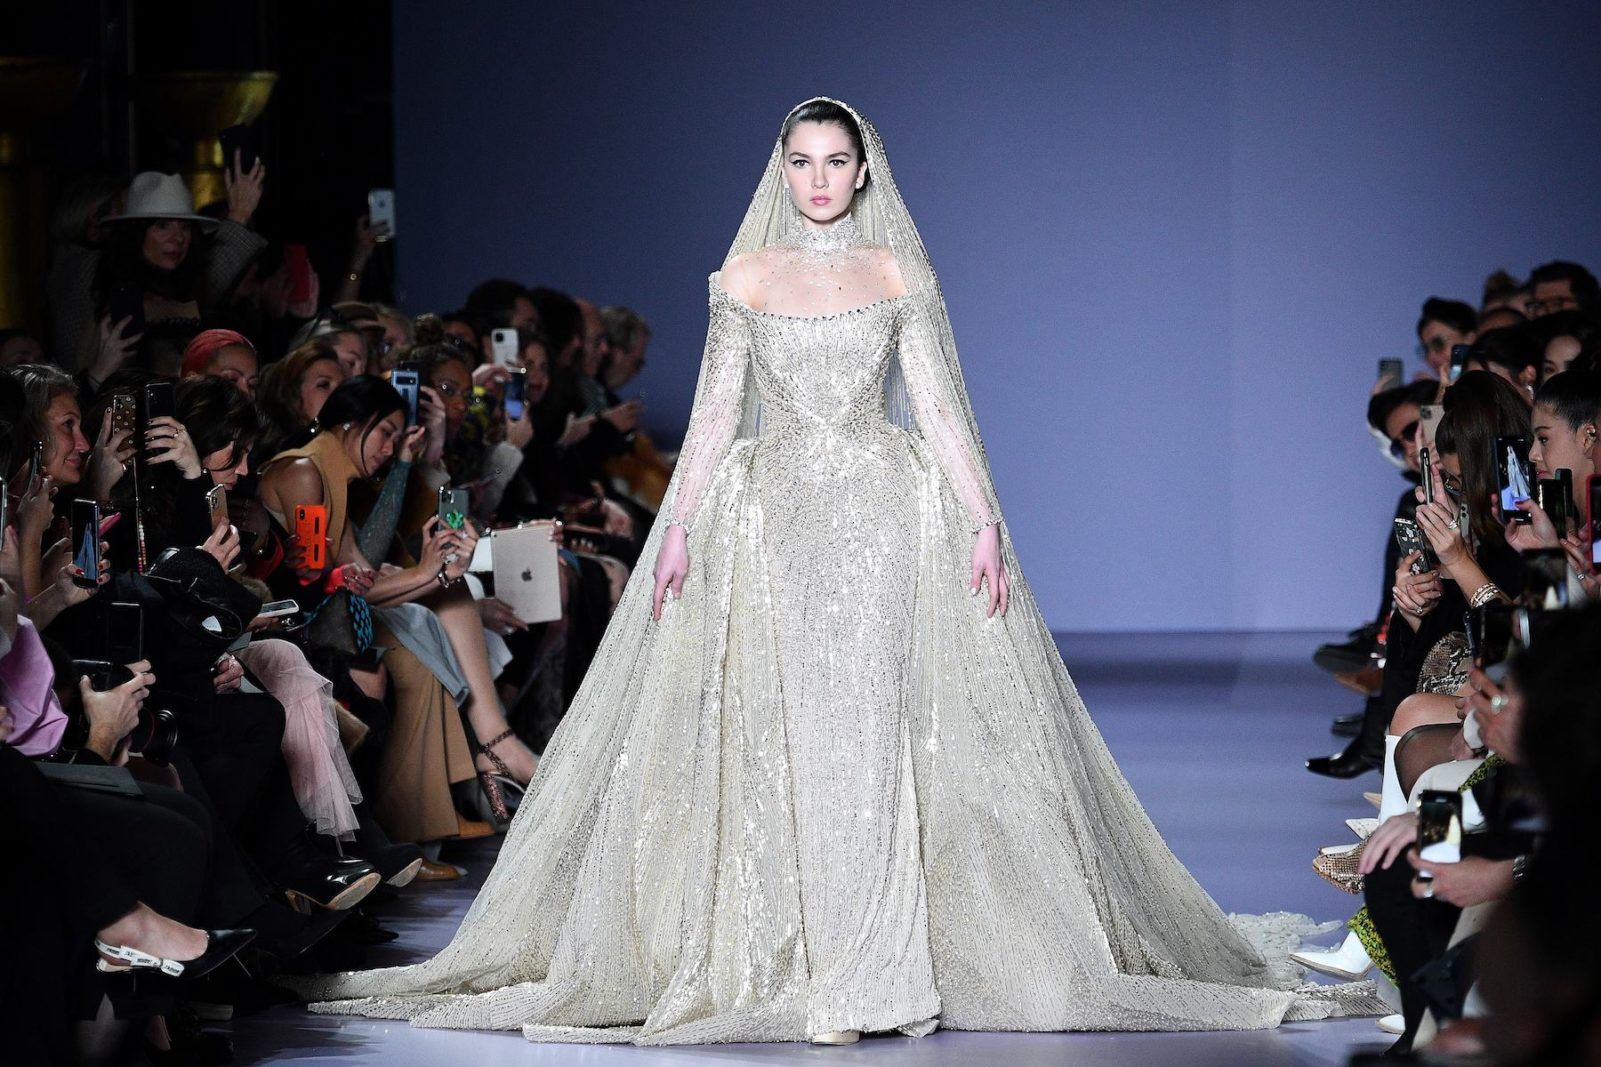 The Most Beautiful Wedding Dresses at Haute Couture Week 2020